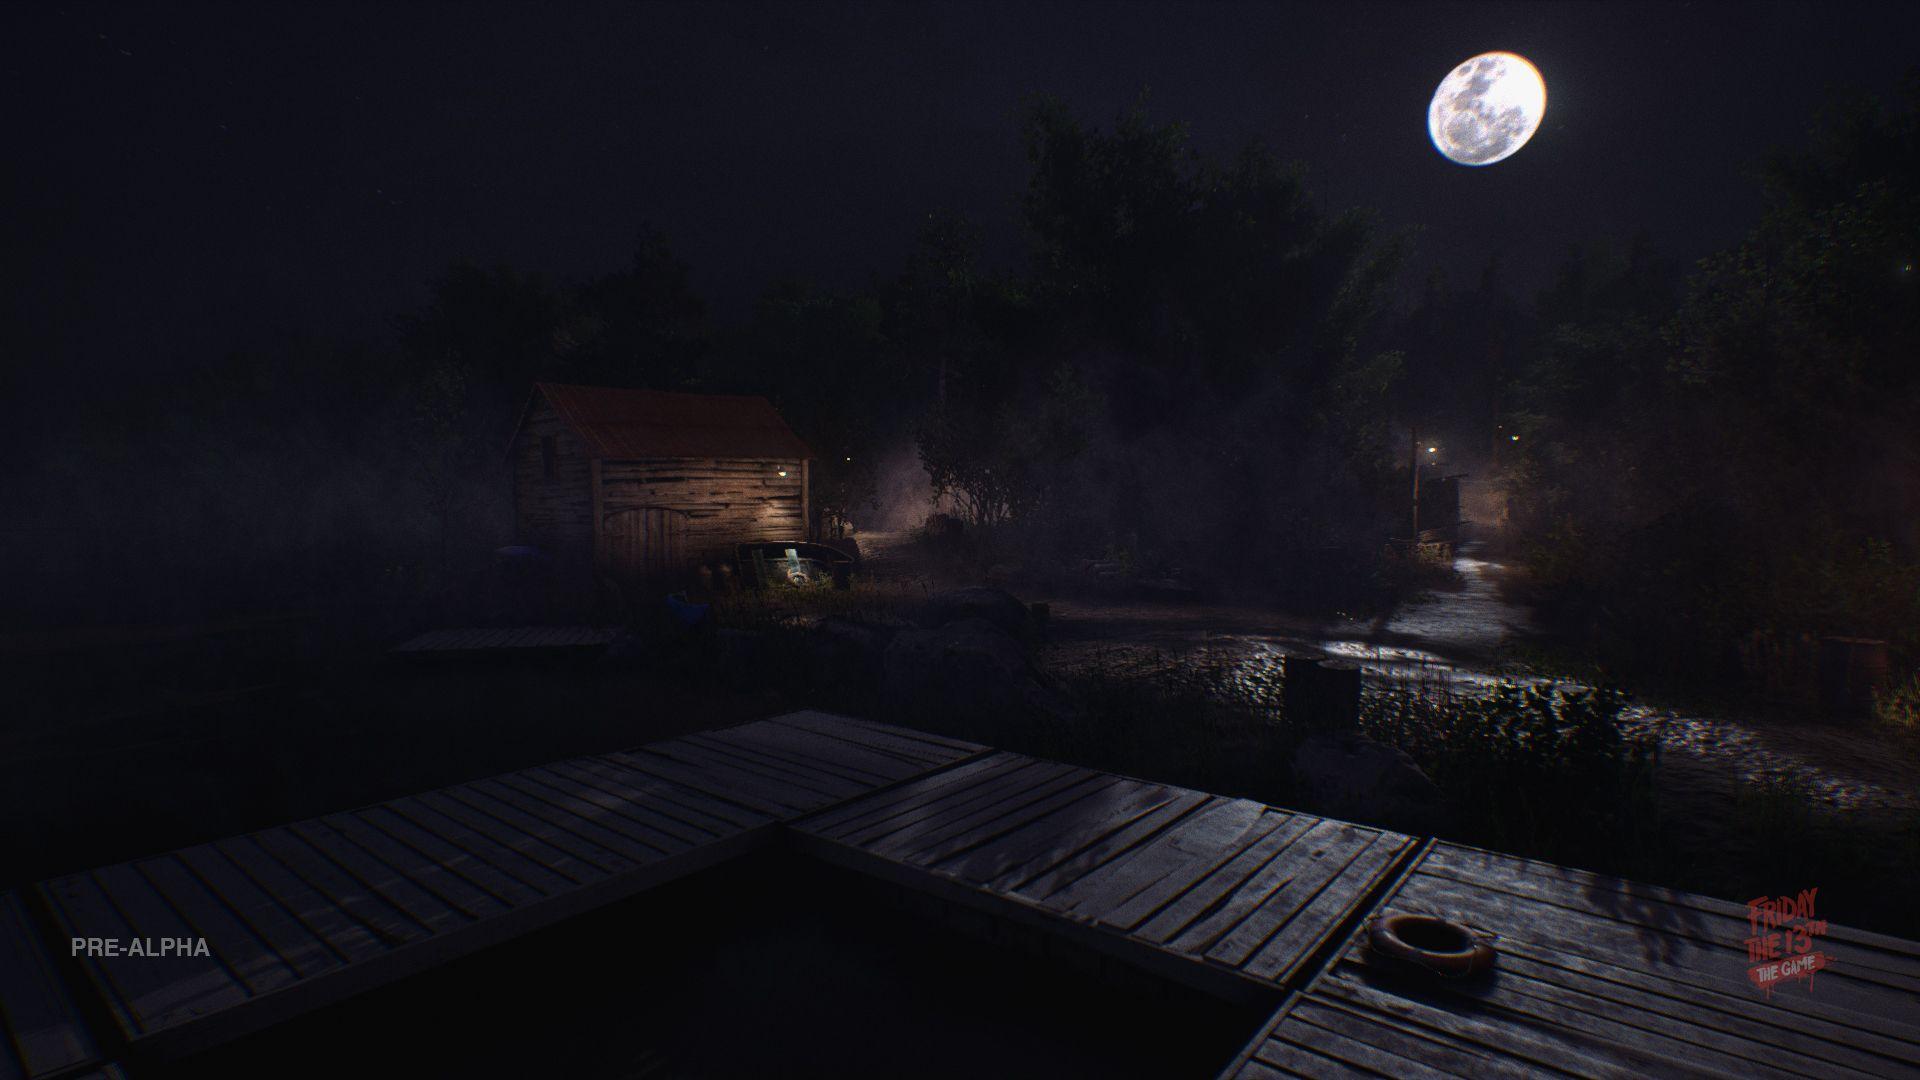 Friday the 13th: The Game Wallpapers Hd: What we already know